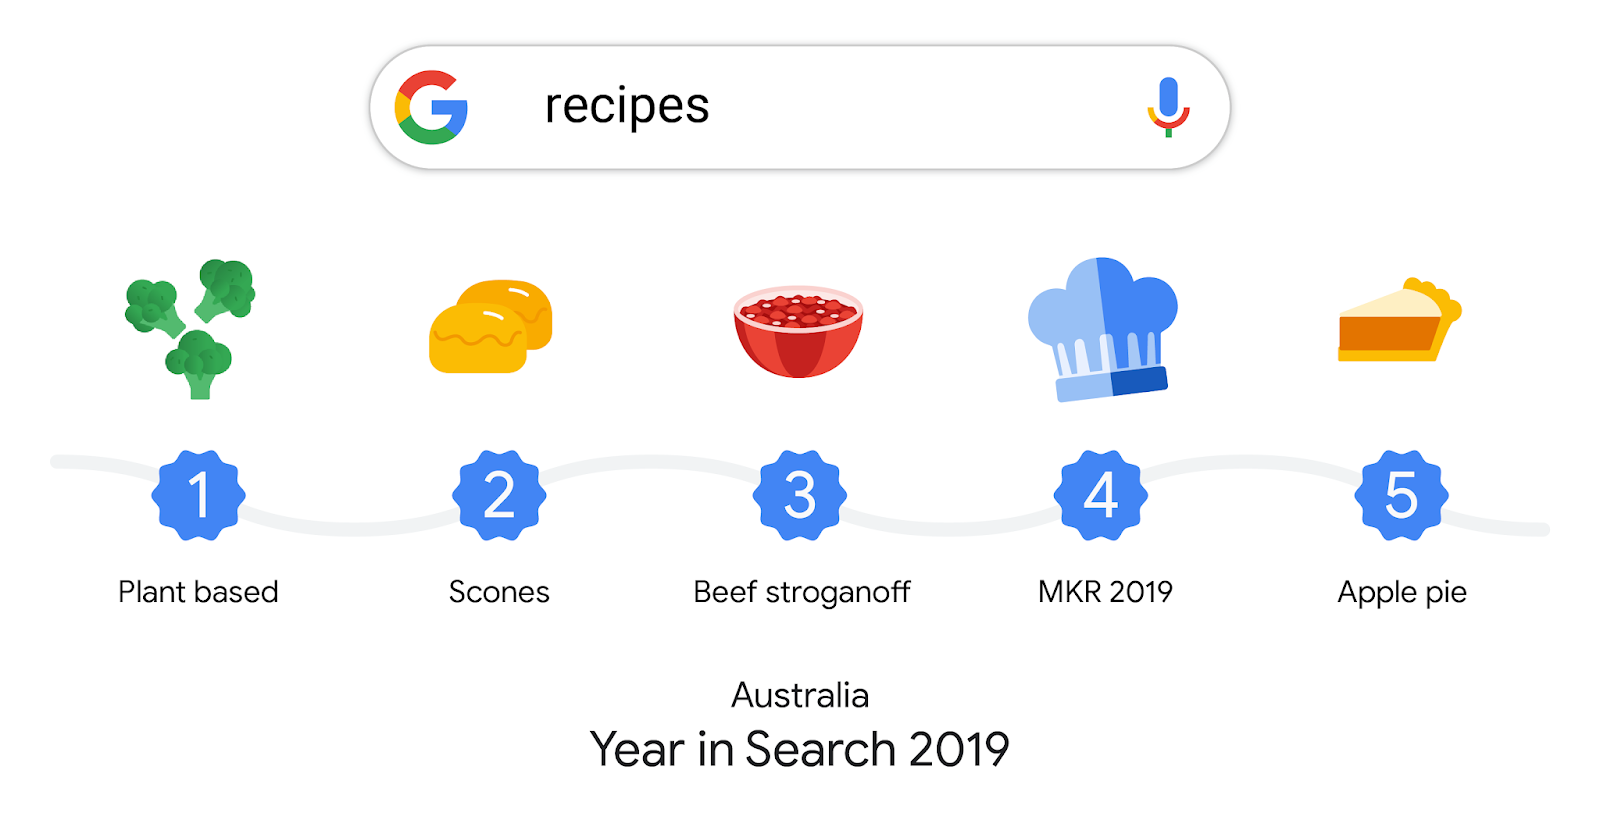 A graphic showing the top trending recipe Searches, with icons for plant based, scones, Beef Stroganoff, MKR 2019 and Apple pie.